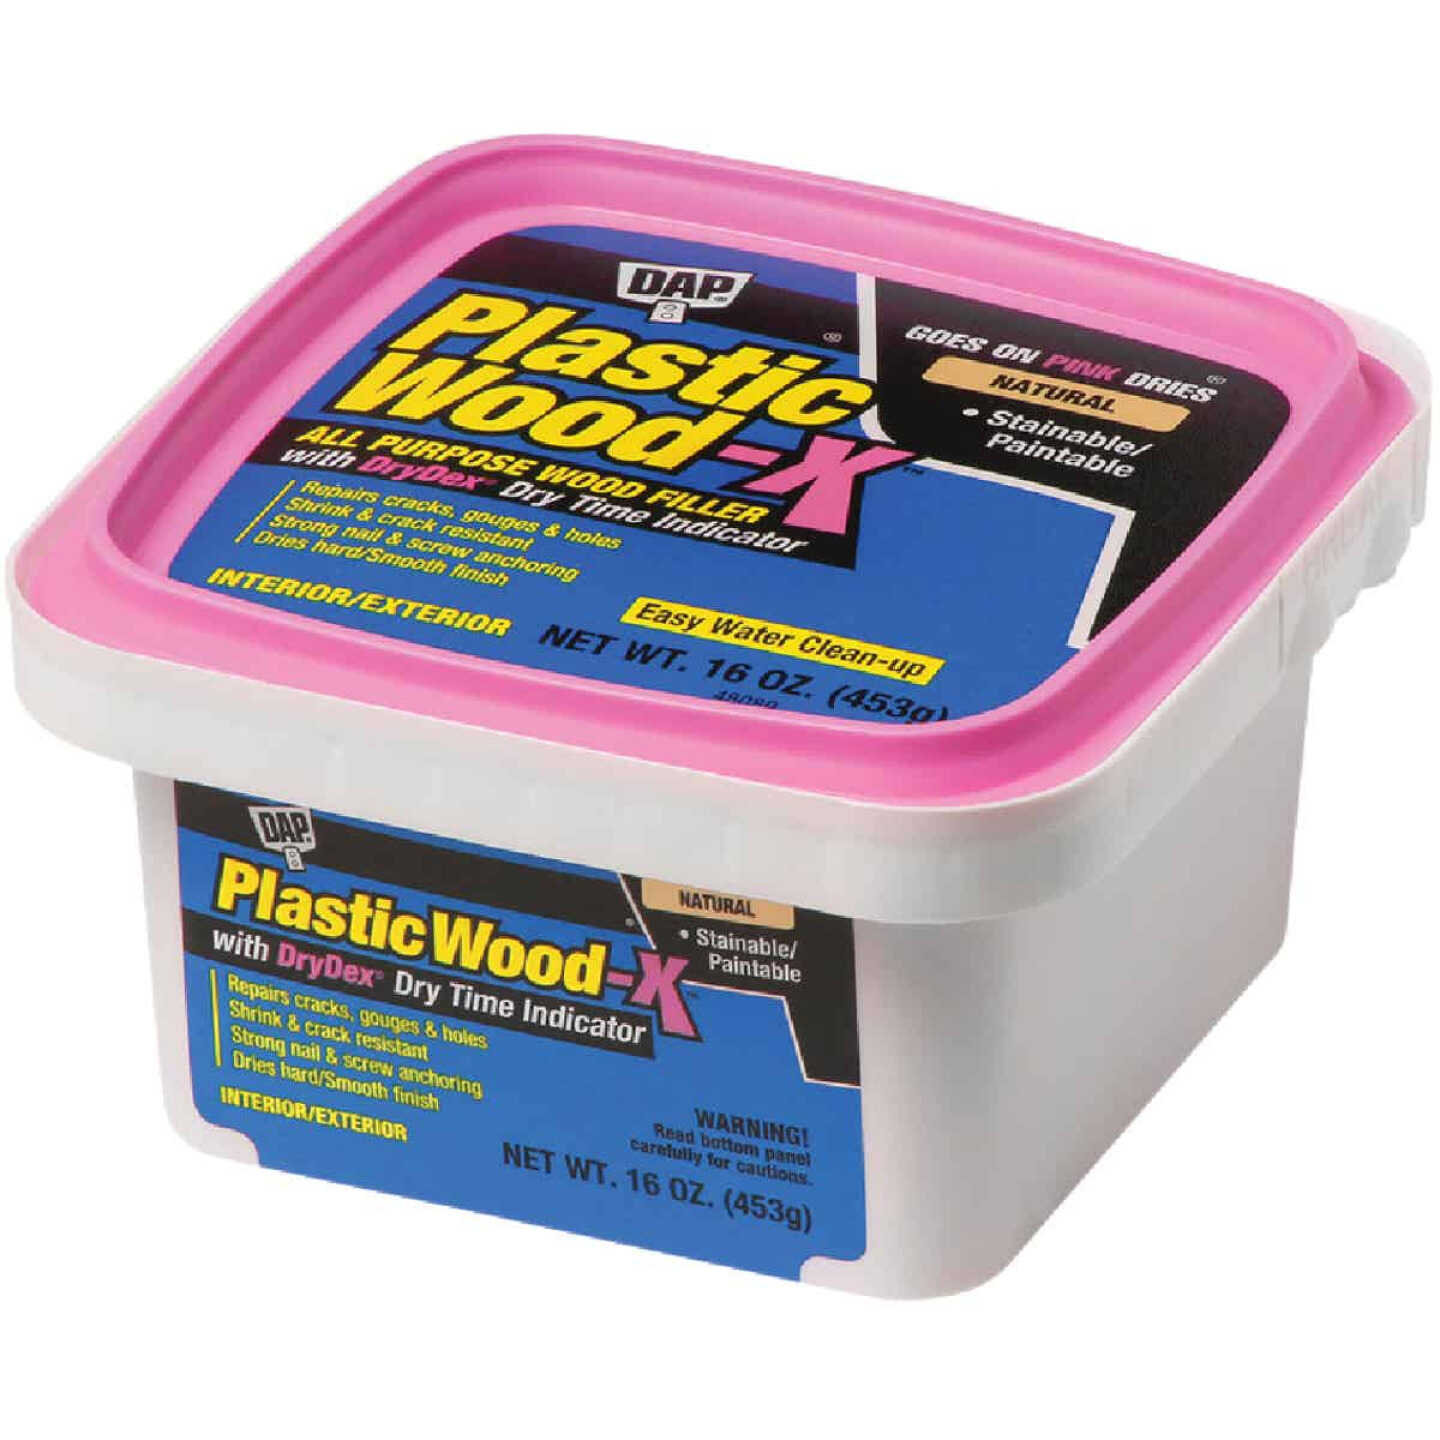 Dap Plastic Wood-X 16 Oz. All Purpose Wood Filler with DryDex Dry Time  Indicator - Power Townsend Company